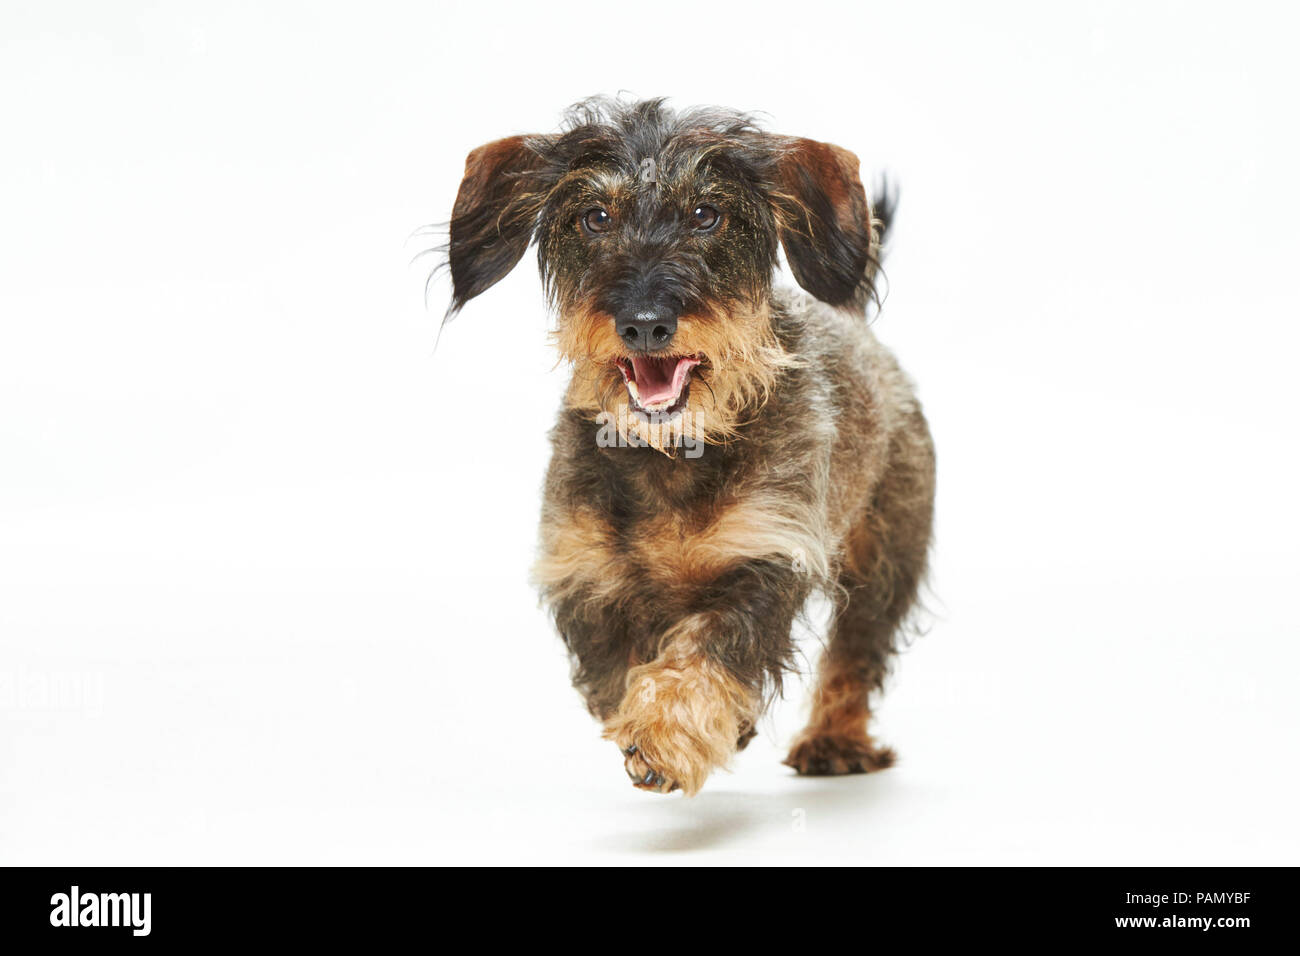 Wire-haired Dachshund. Adult dog running. Studio picture against a white background. Germany Stock Photo